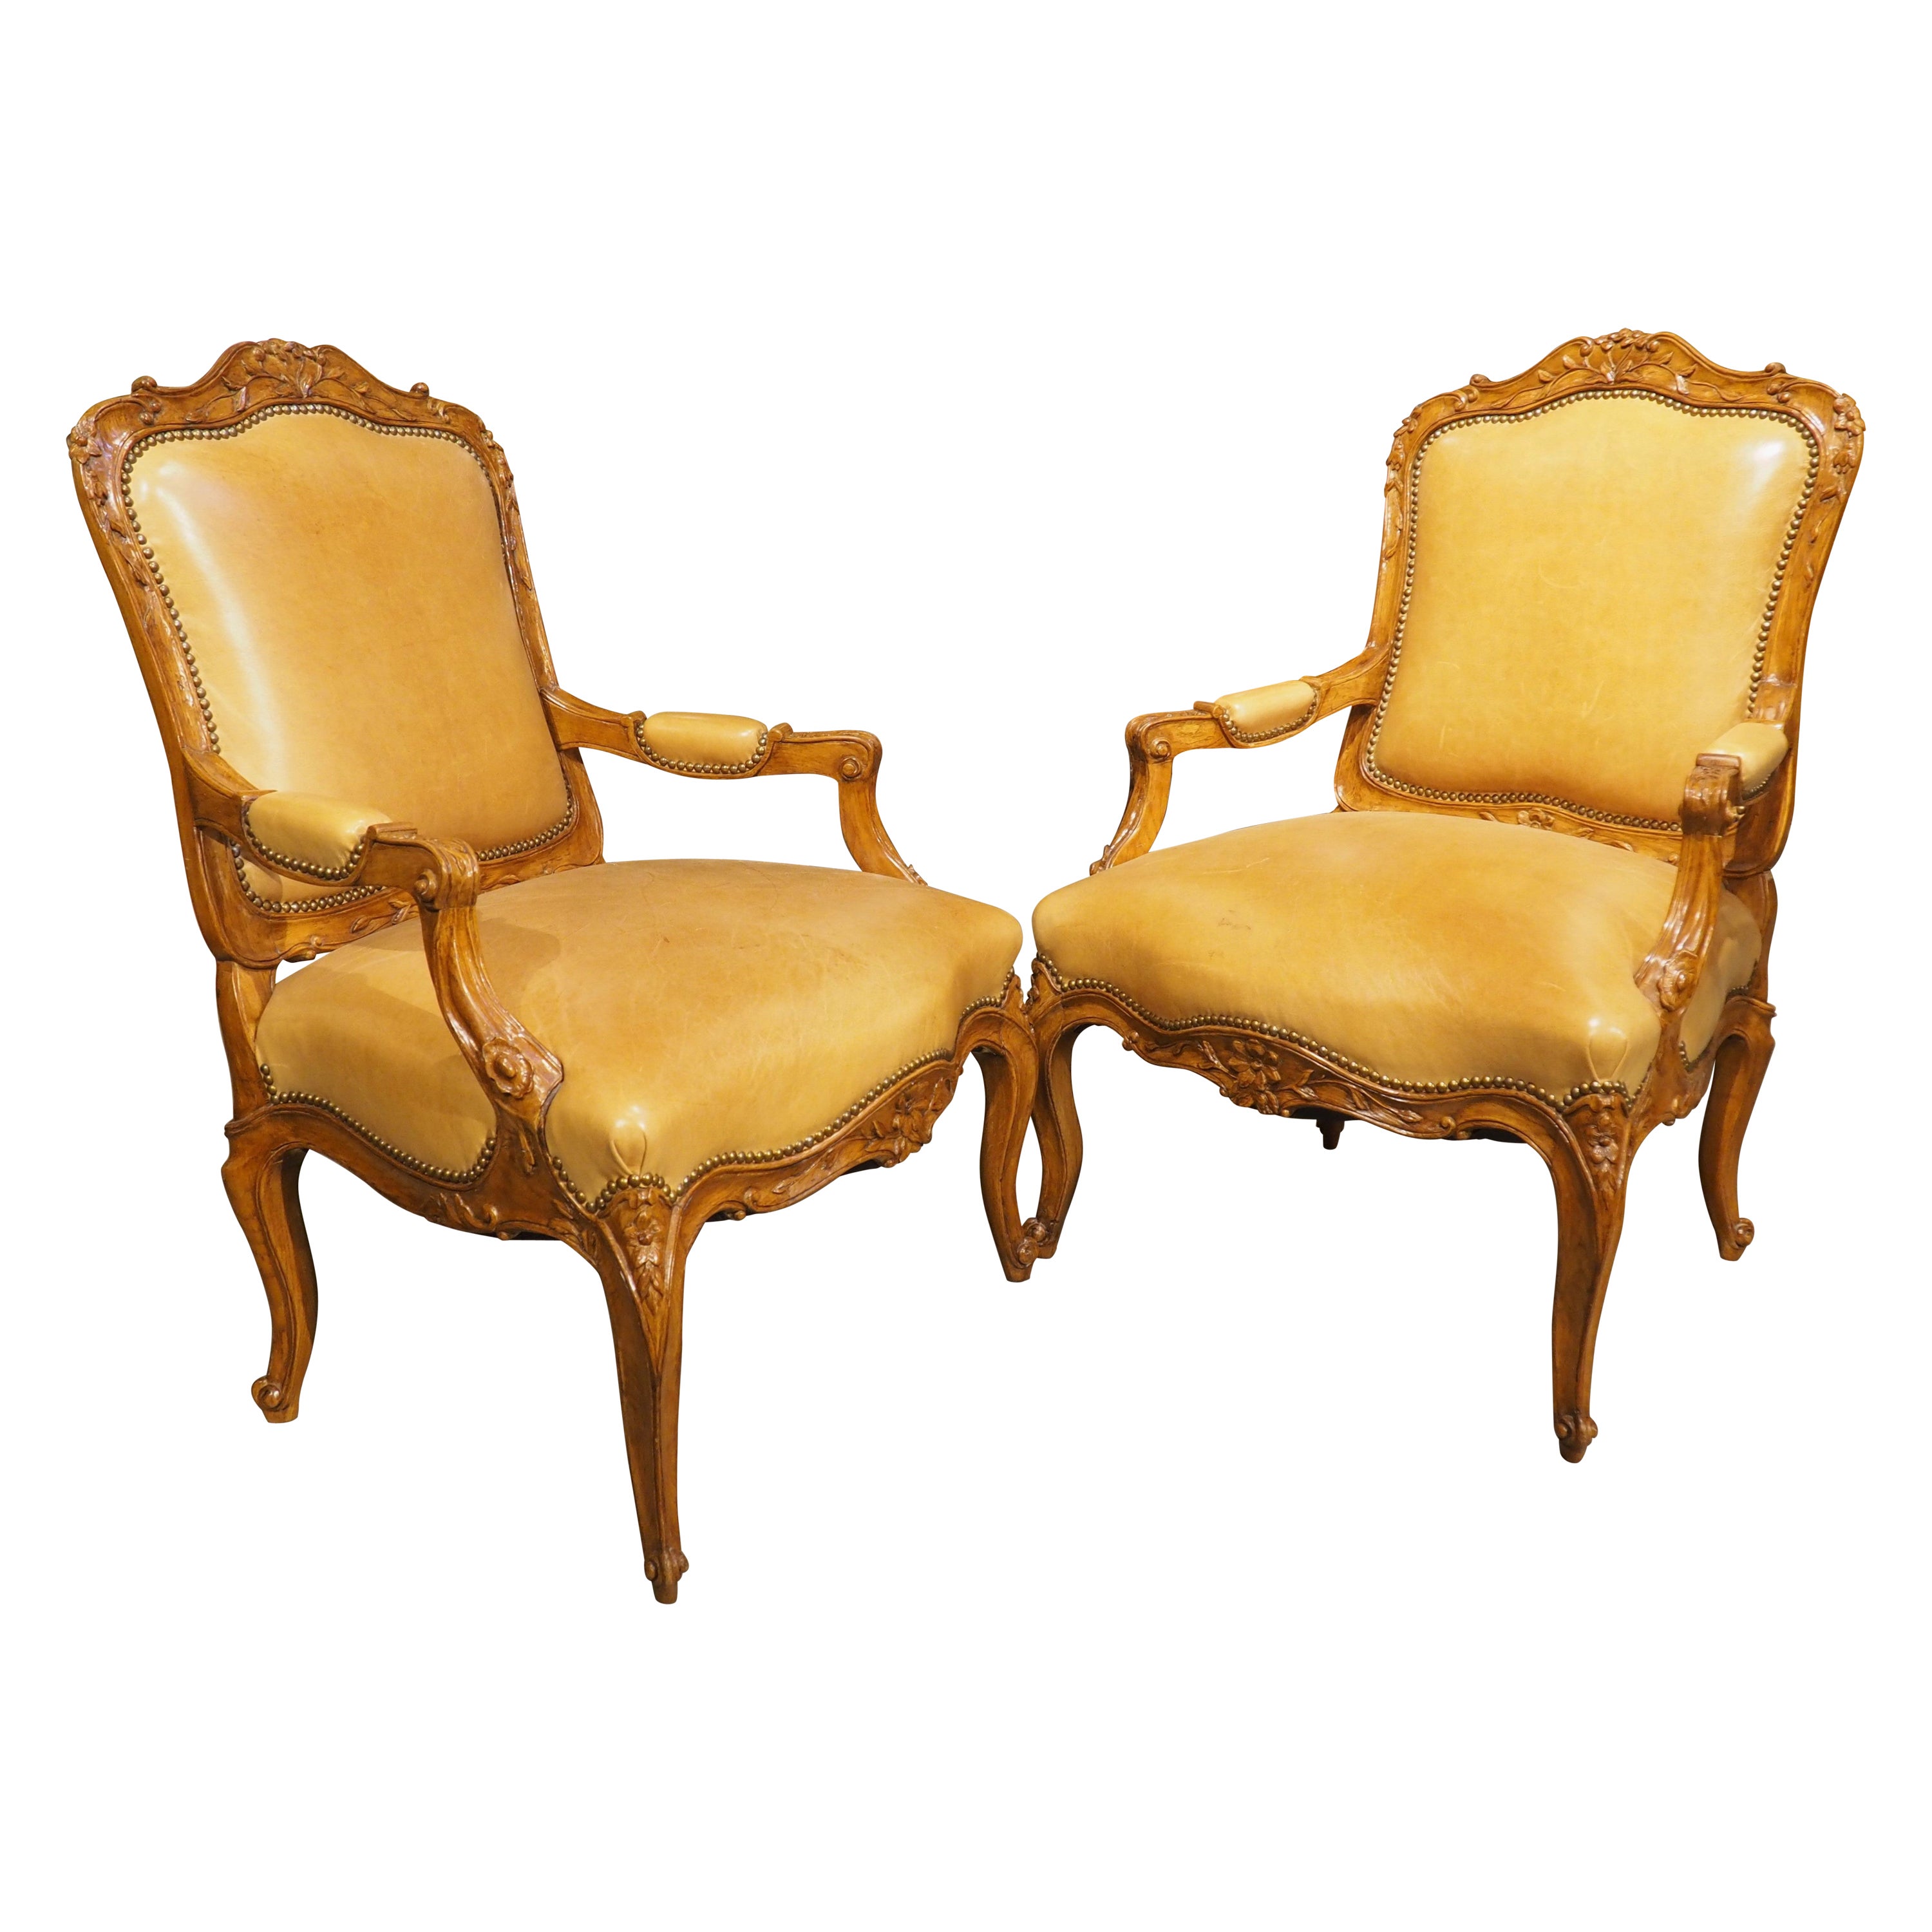 Pair of French Carved Regence Style Armchairs with Leather Upholstery, C. 1900 For Sale